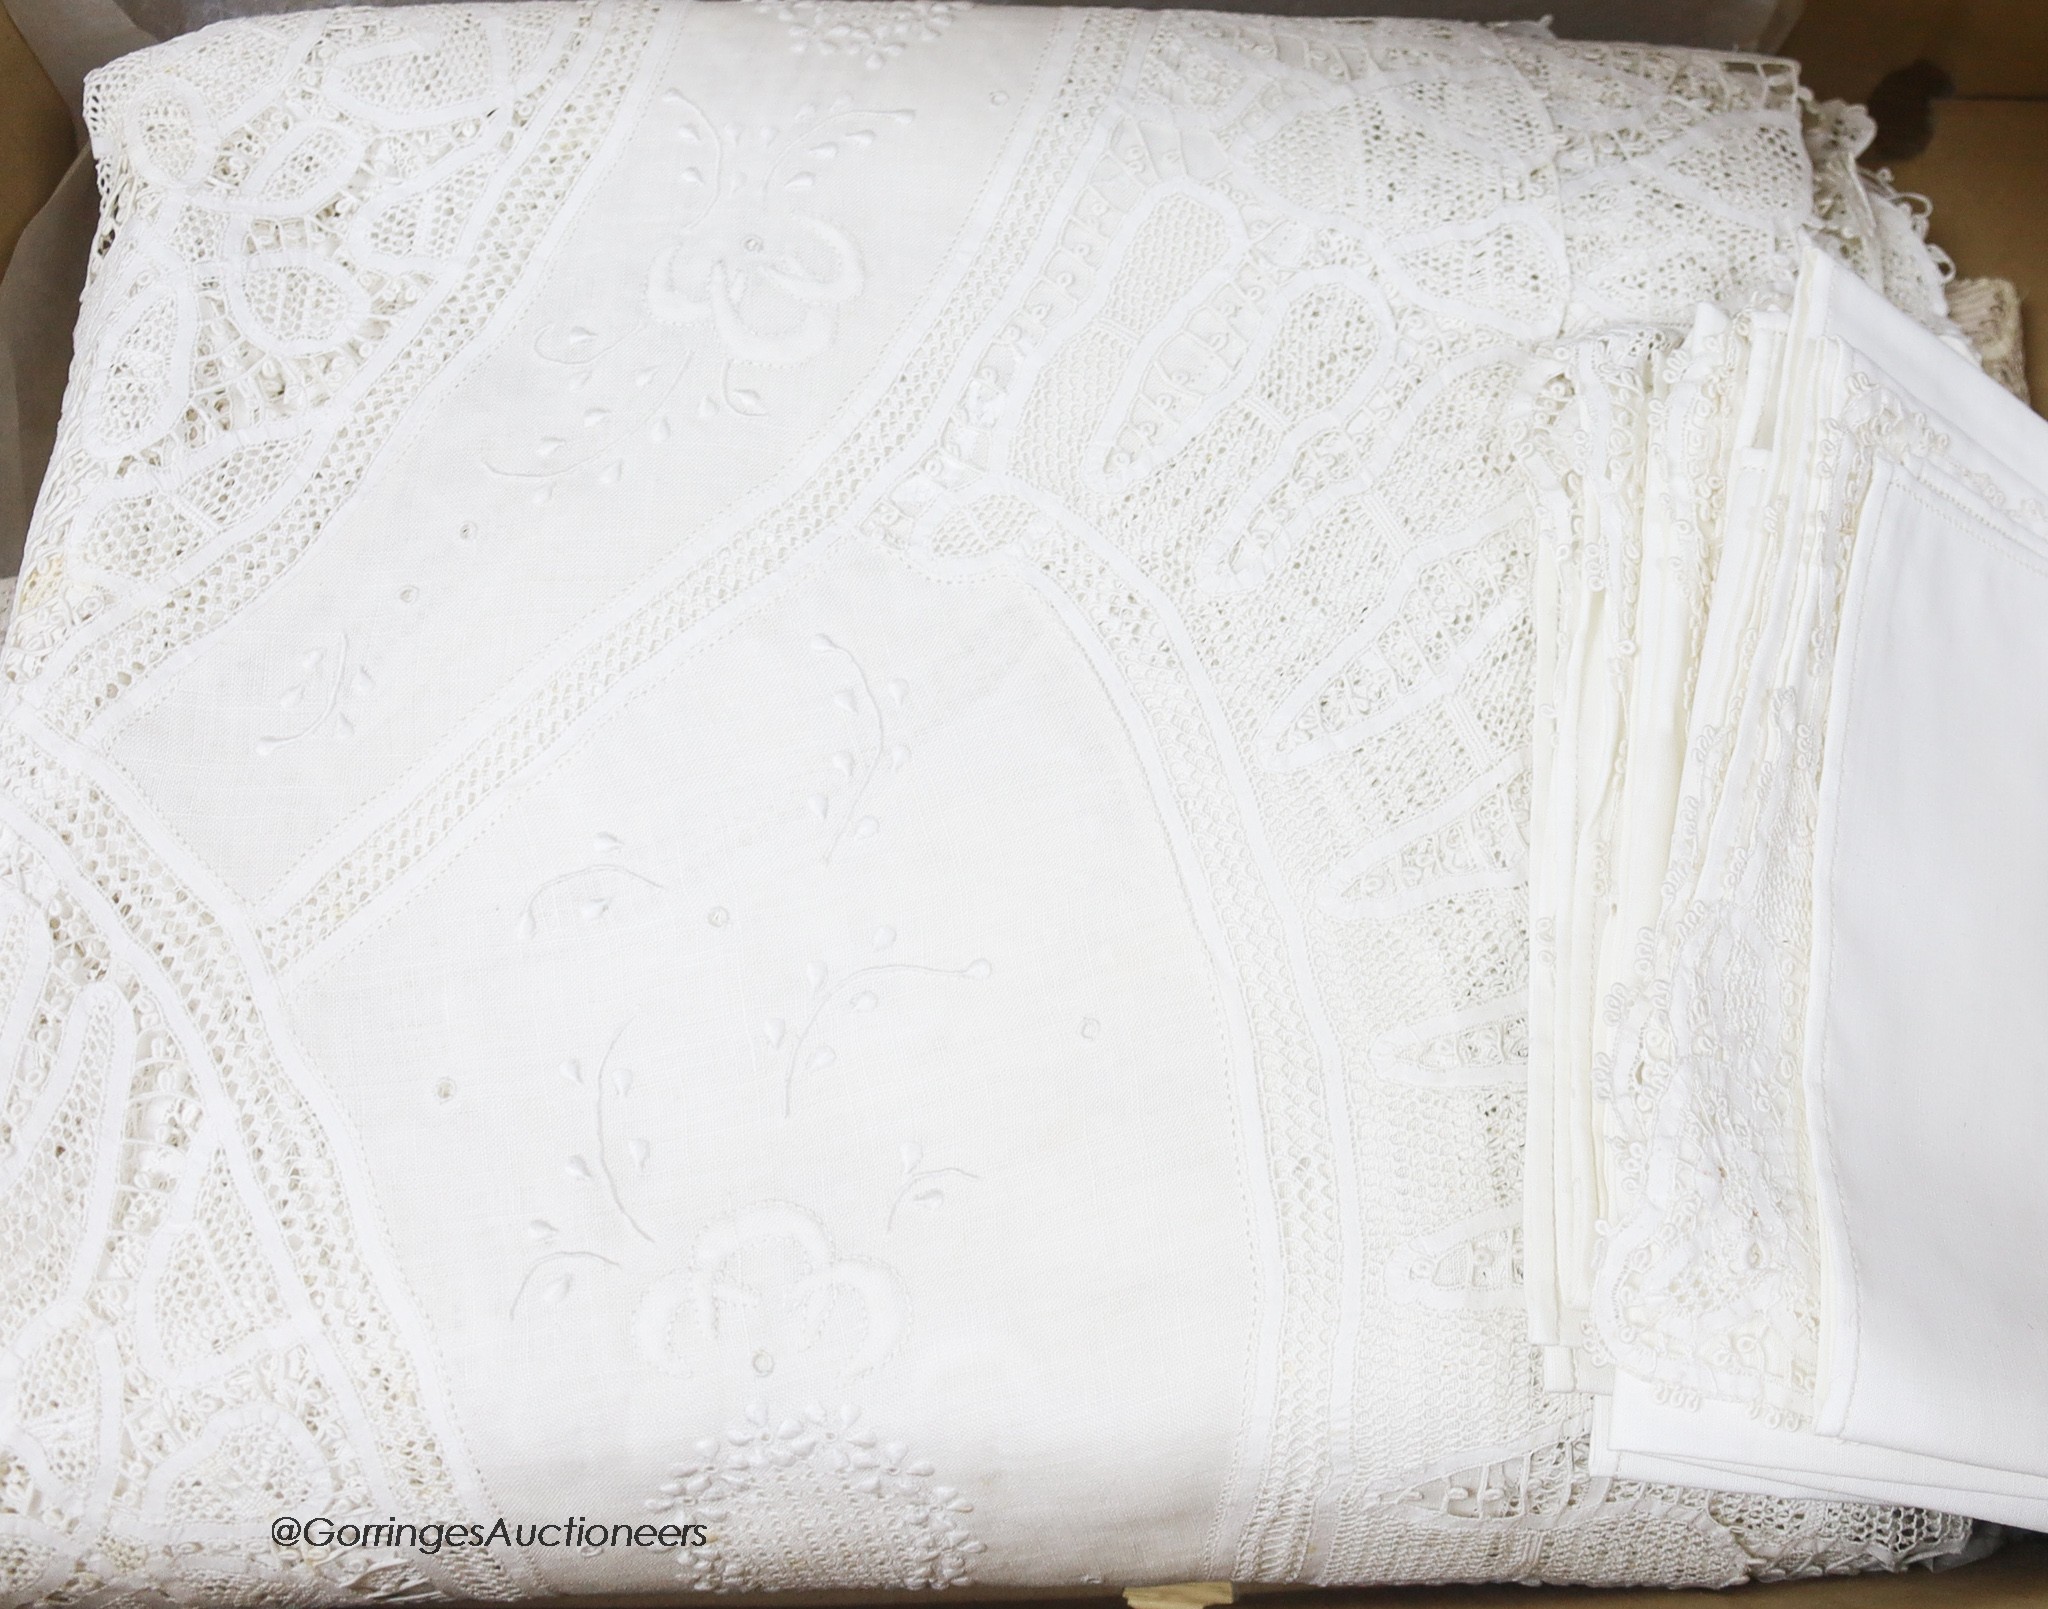 A finely worded tapelace and cutwork white tablecloth with matching serviettes and a similar ecru table cover